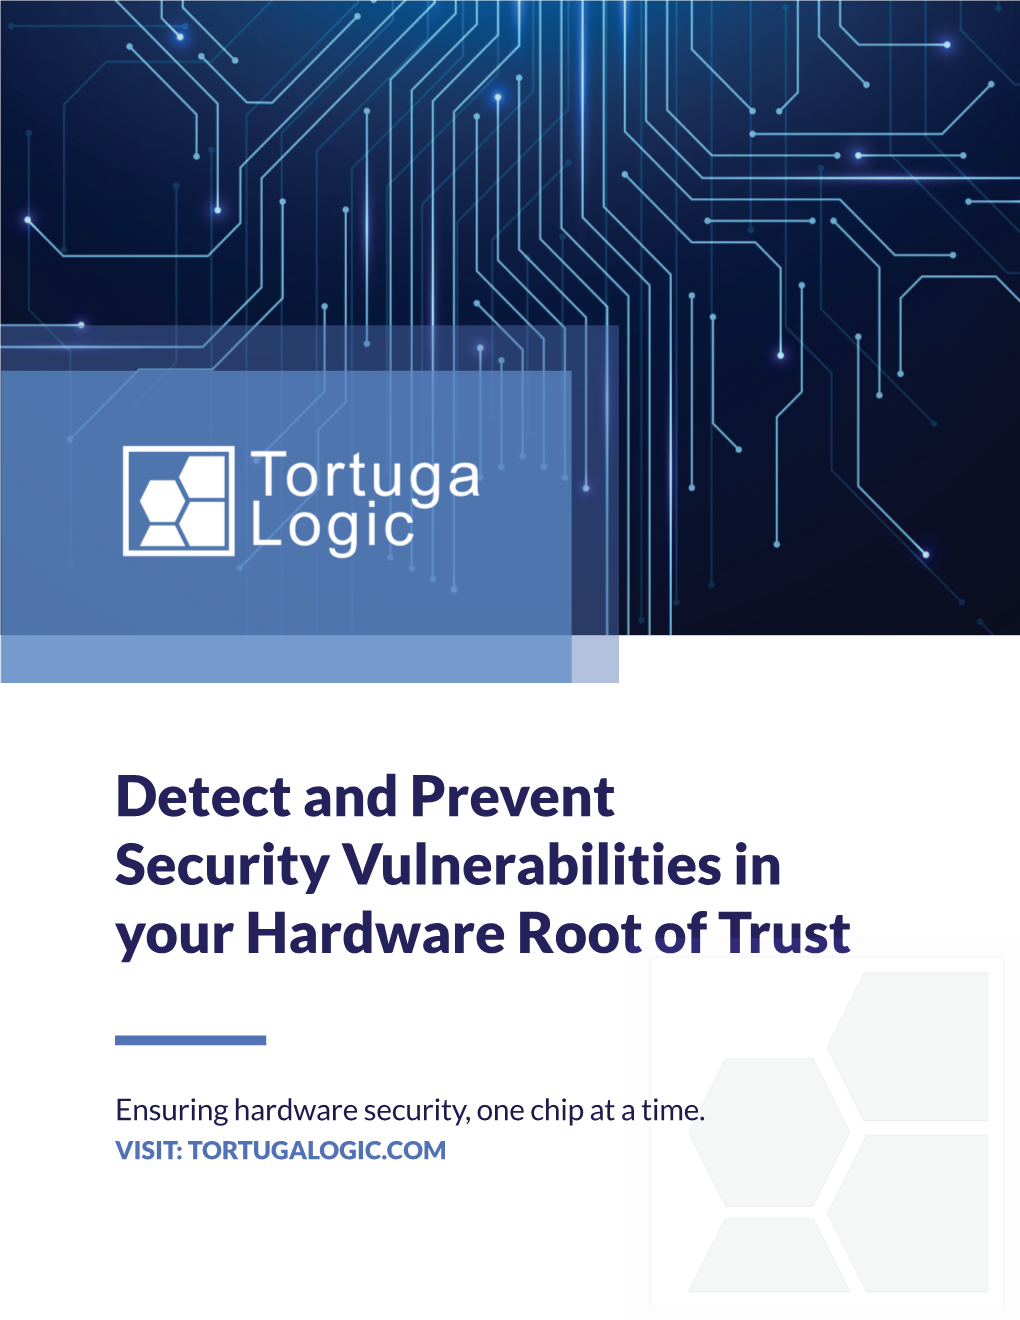 Detect and Prevent Security Vulnerabilities in Your Hardware Root of Trust